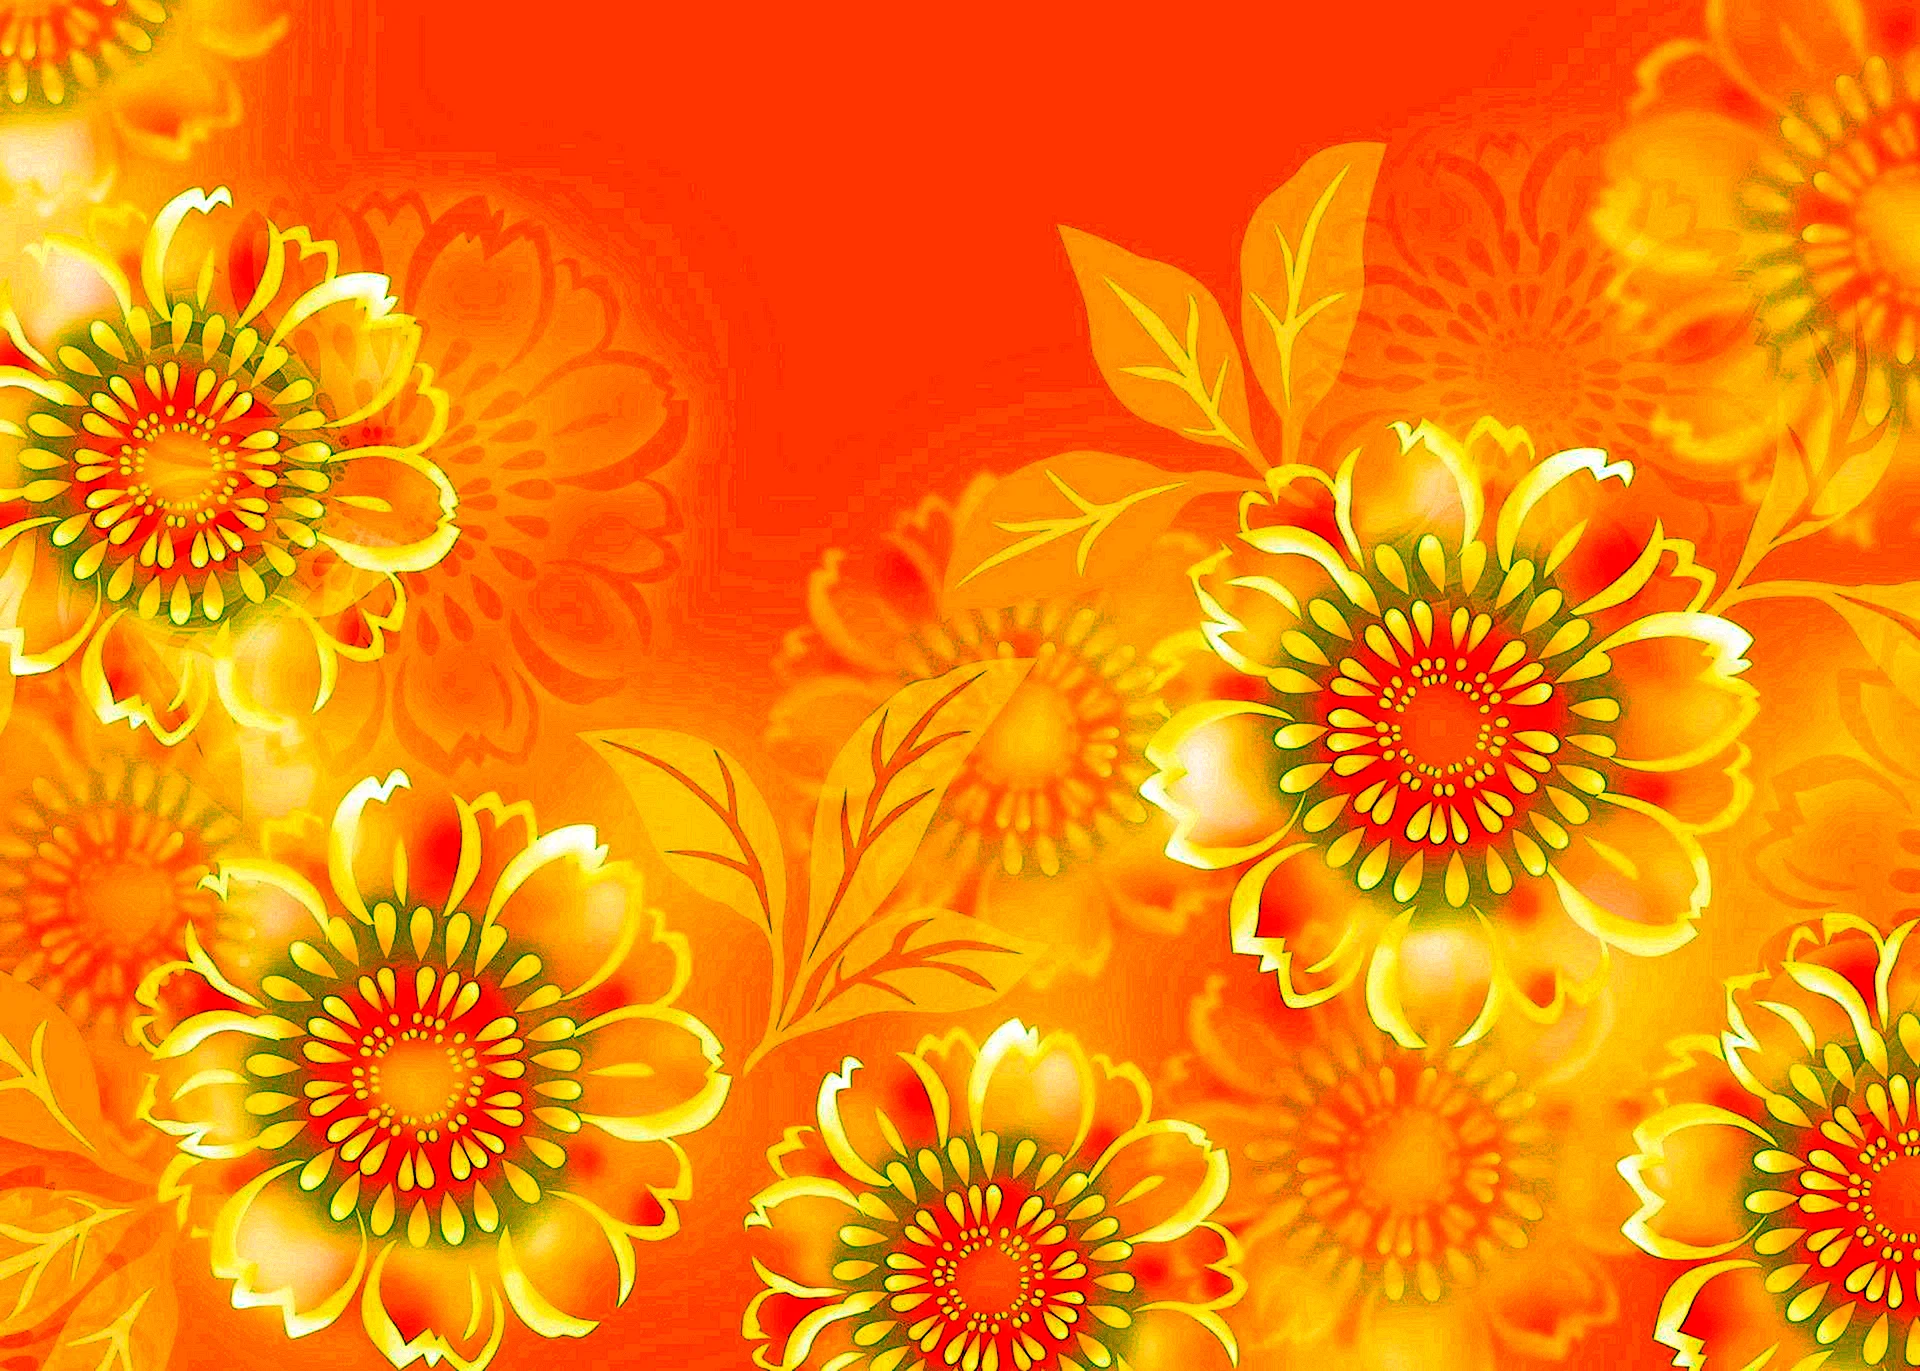 Abstract Floral Background Wallpaper